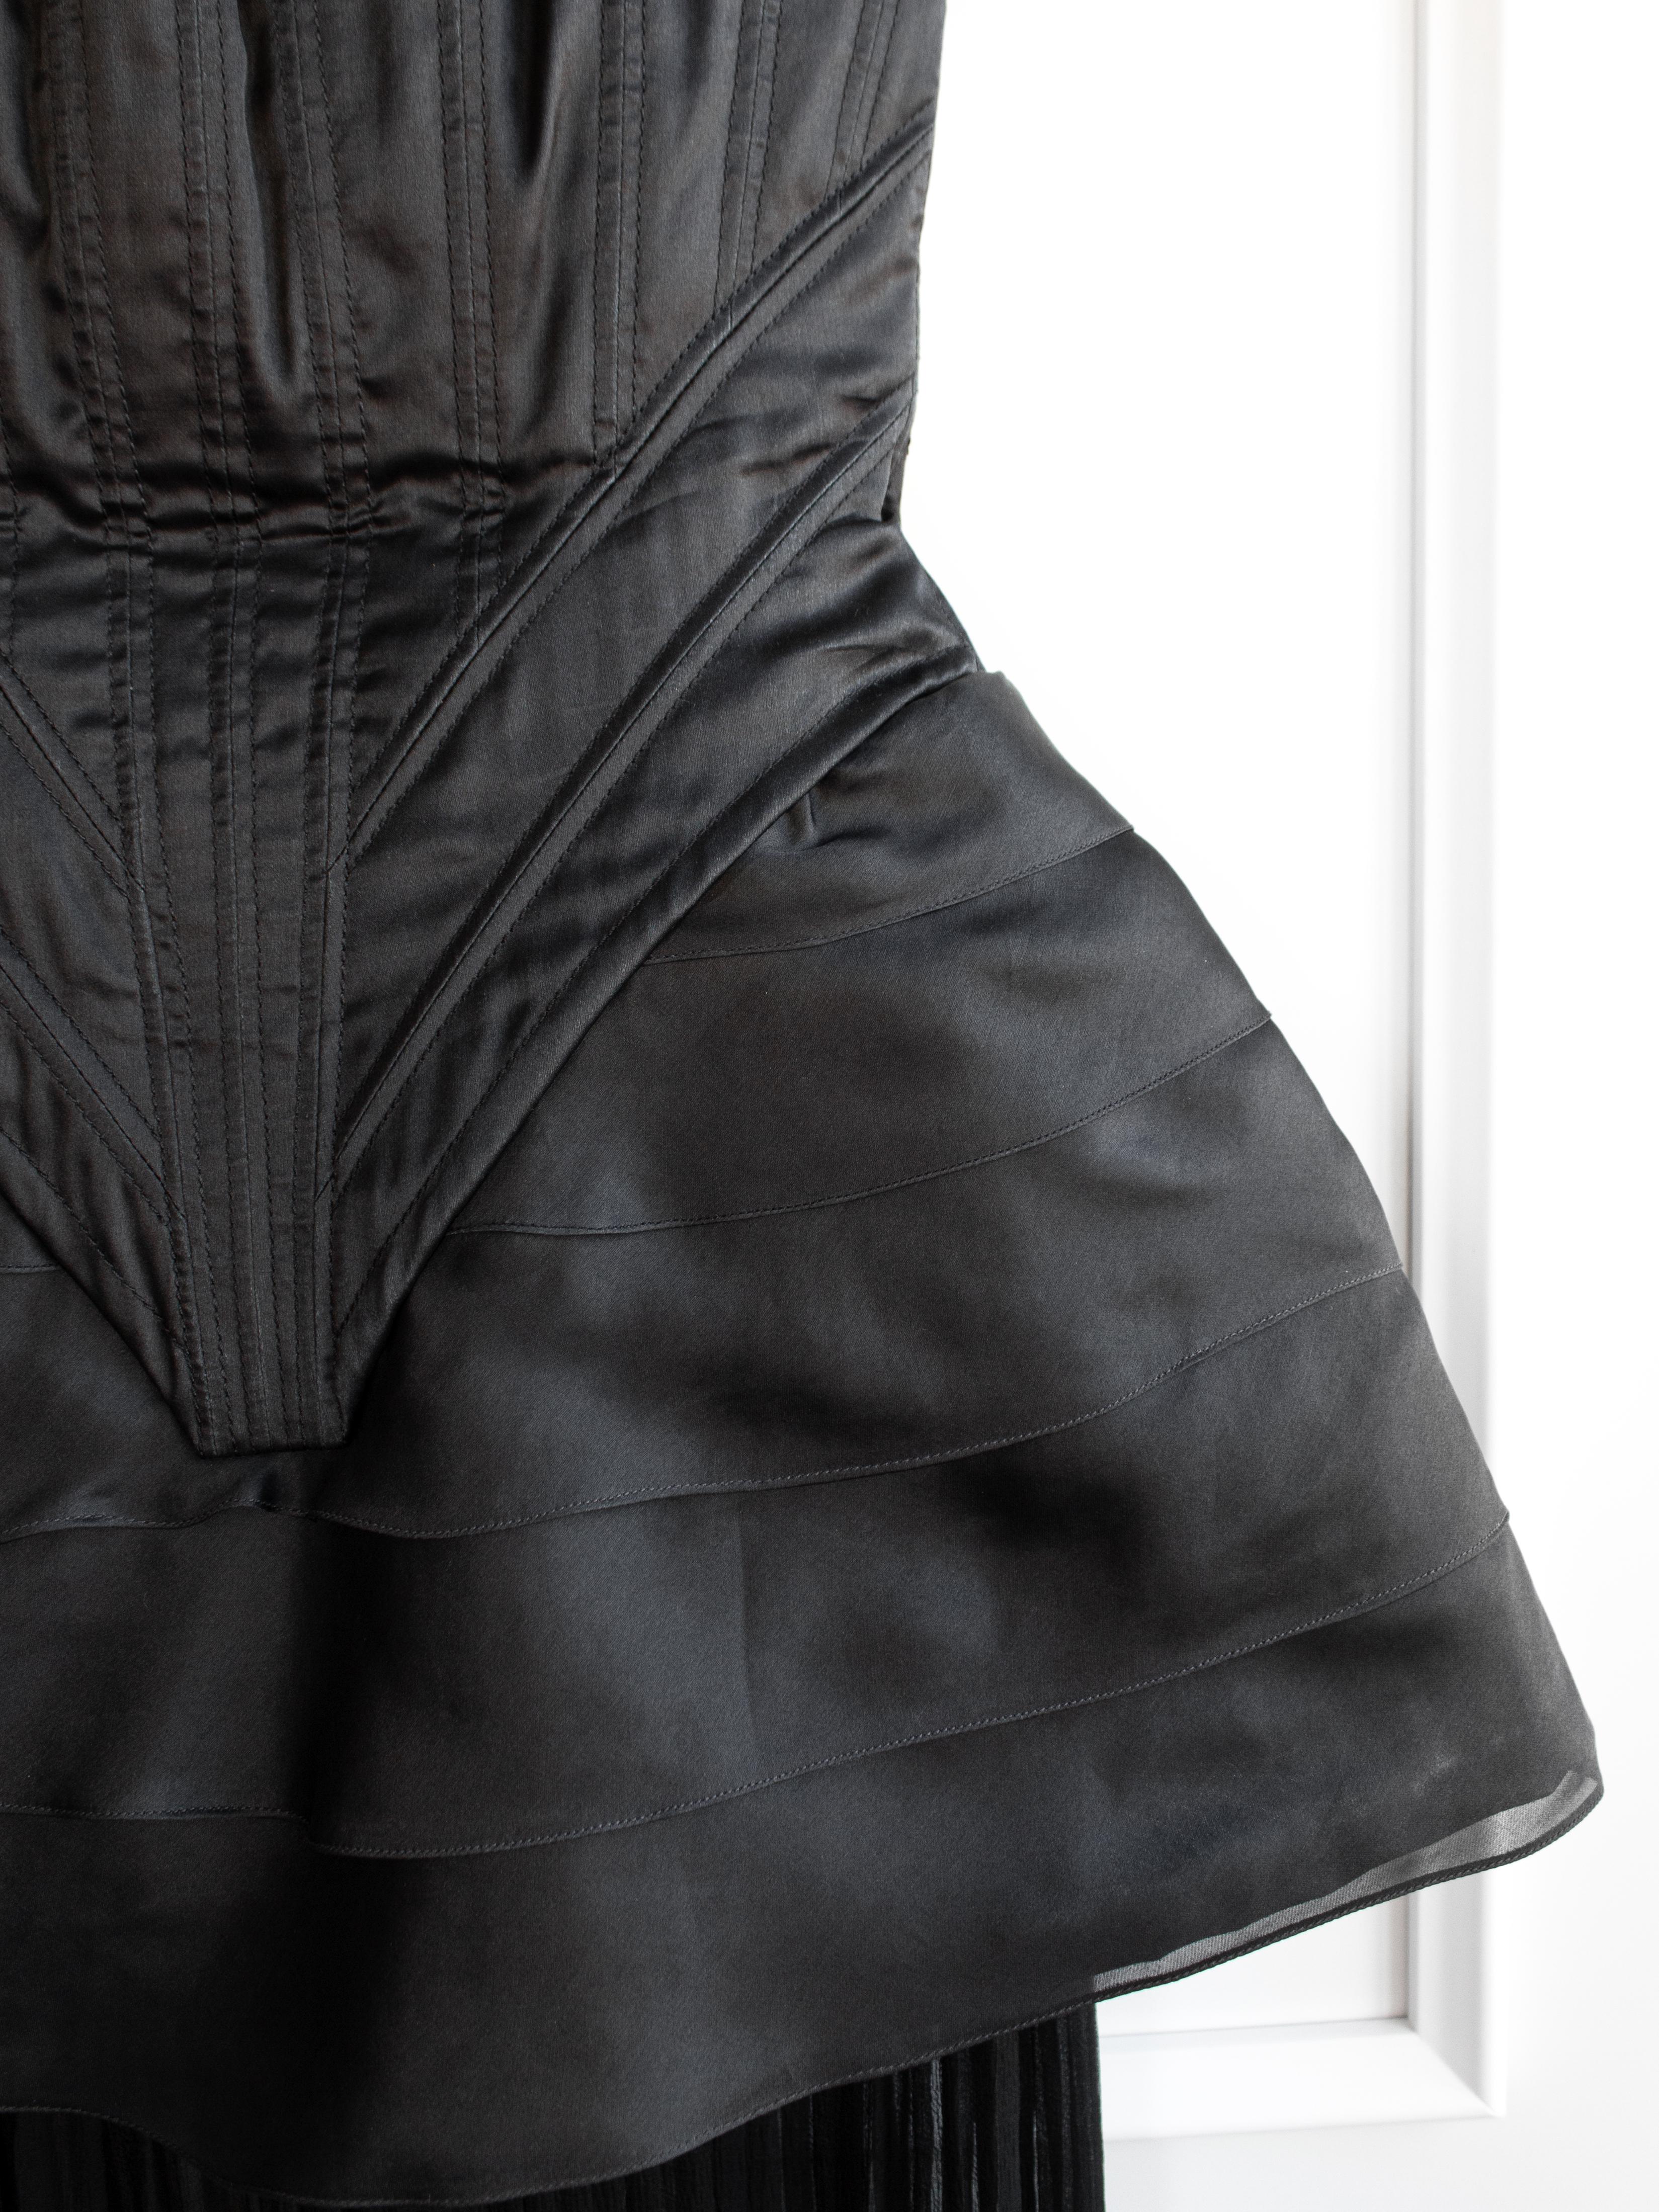 Chanel Vintage Haute Couture Fall/Winter 1992 Black Satin Corset Gown Dress For Sale 6